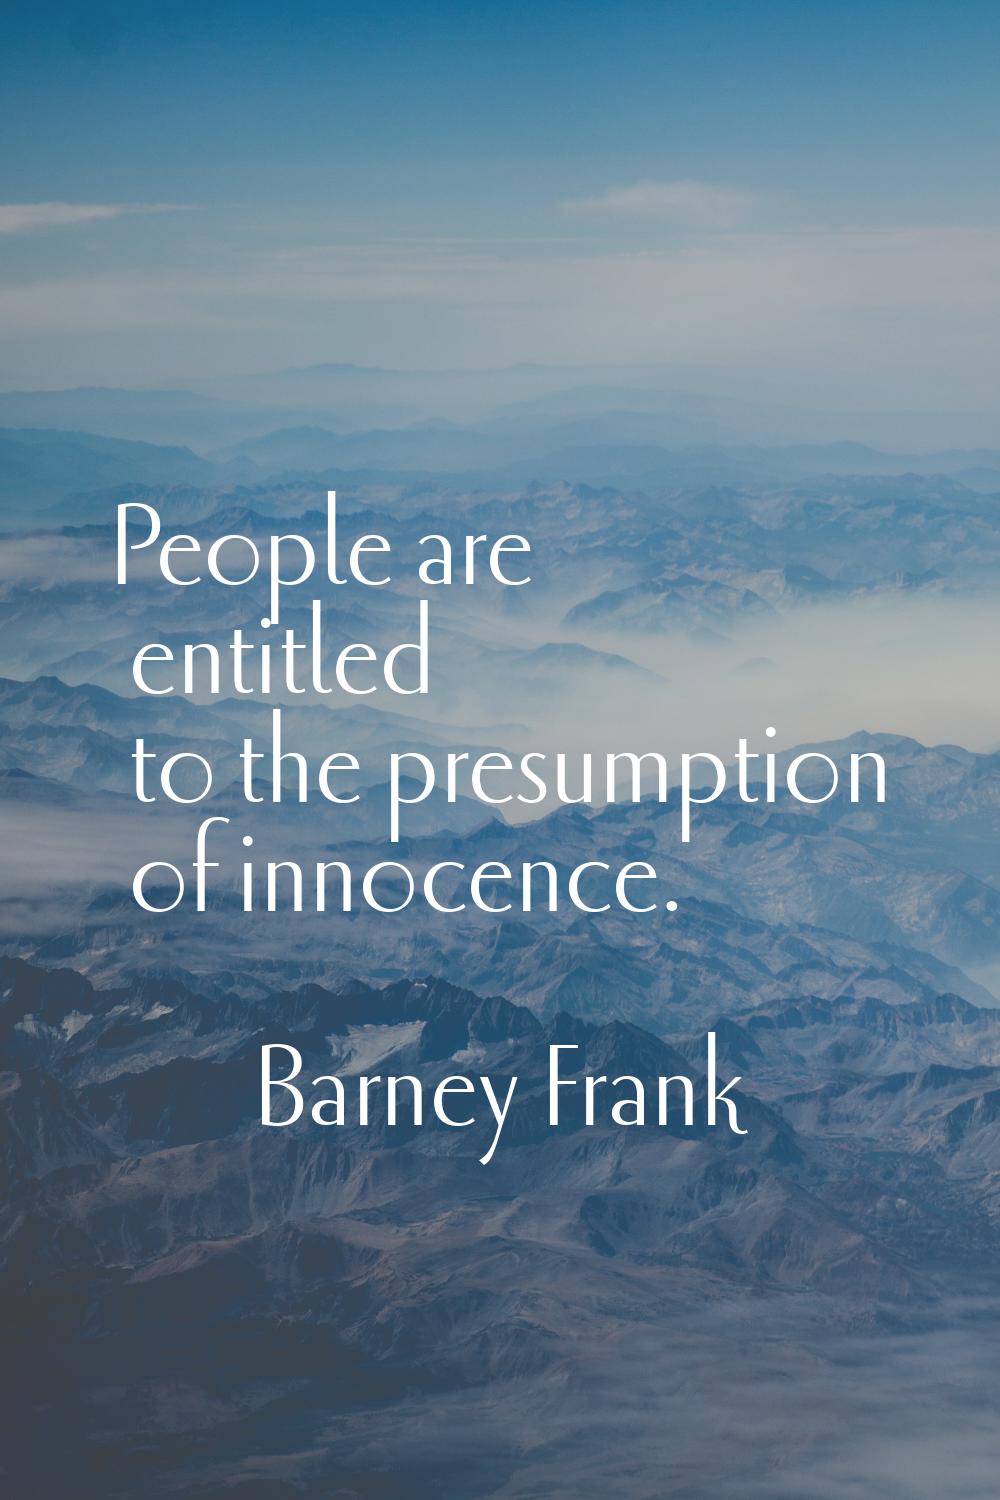 People are entitled to the presumption of innocence.